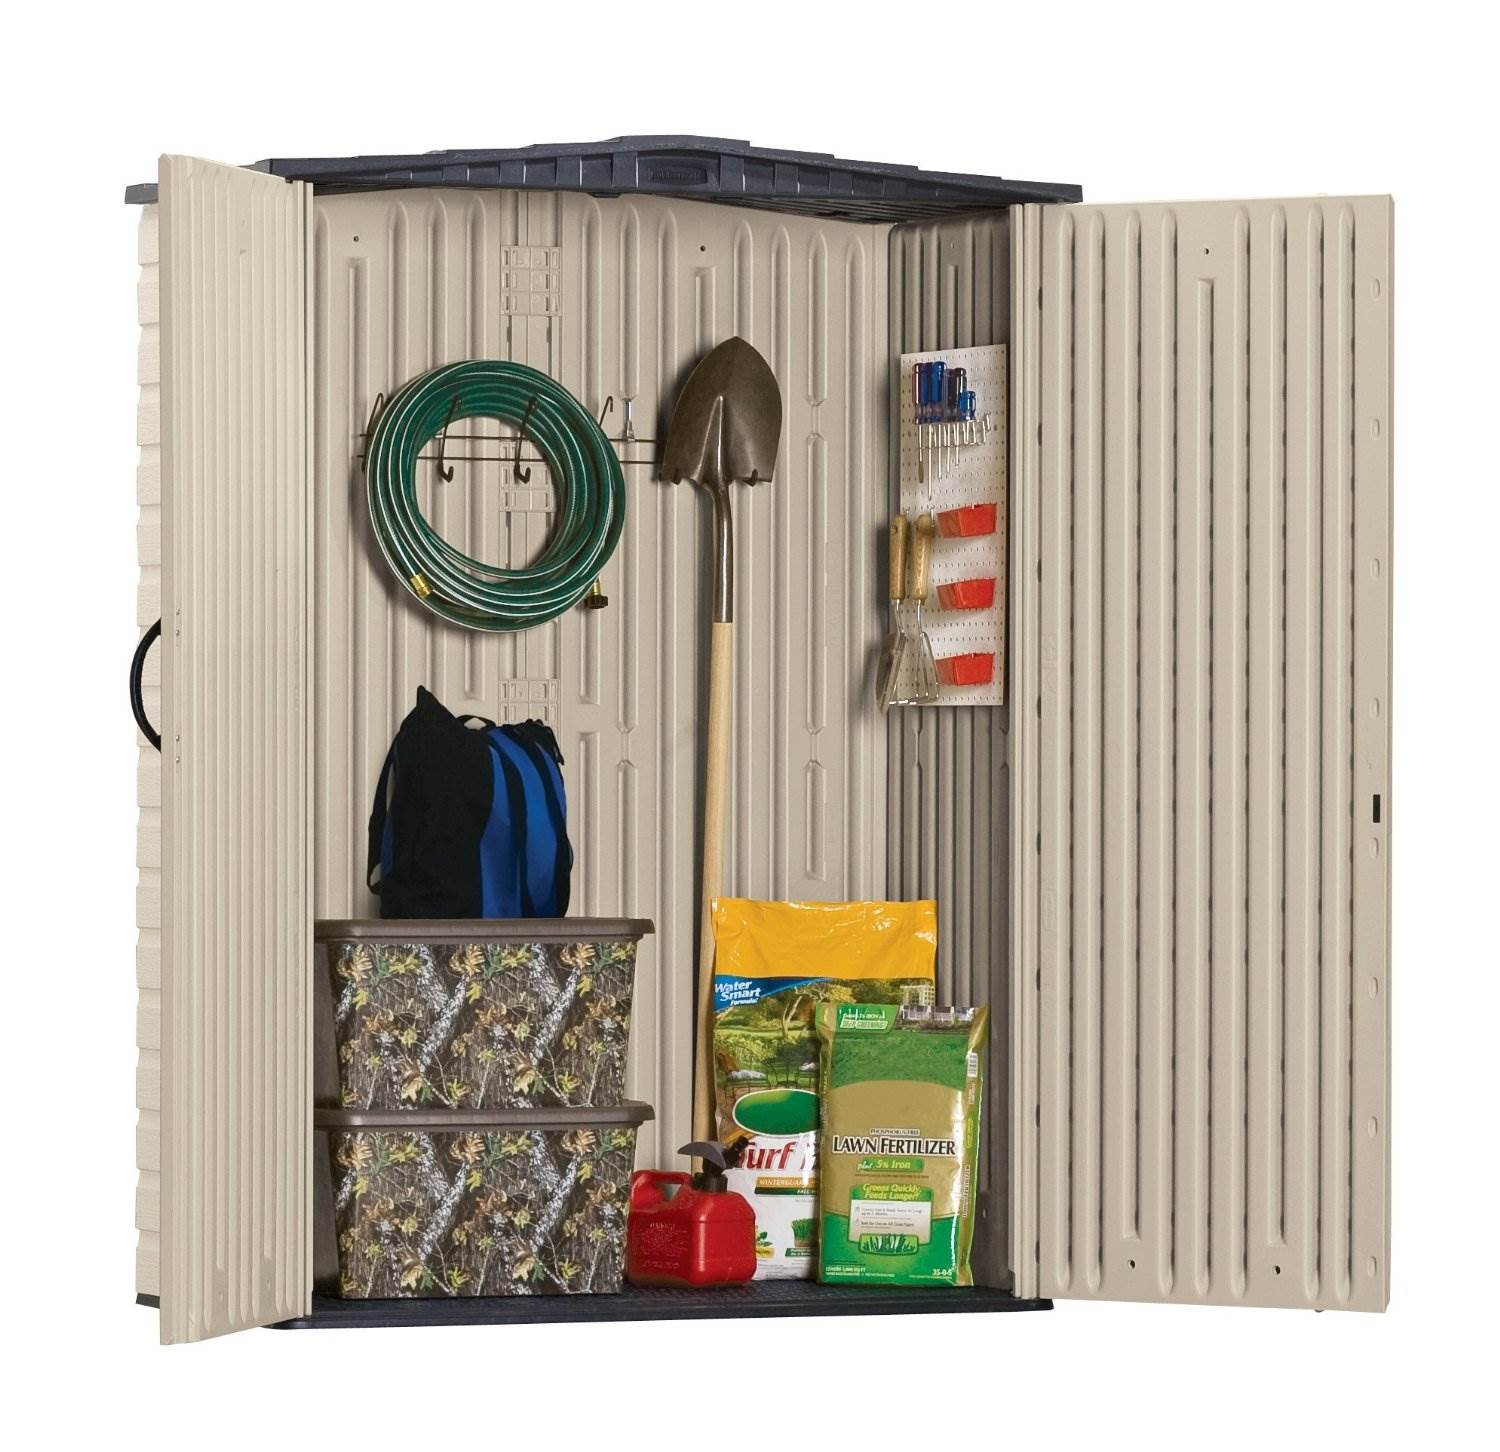 Rubbermaid 5 ft. x 2 ft. Vertical Shed - Small  78.5"L x 29.7"W x 14.4"H - image 3 of 3